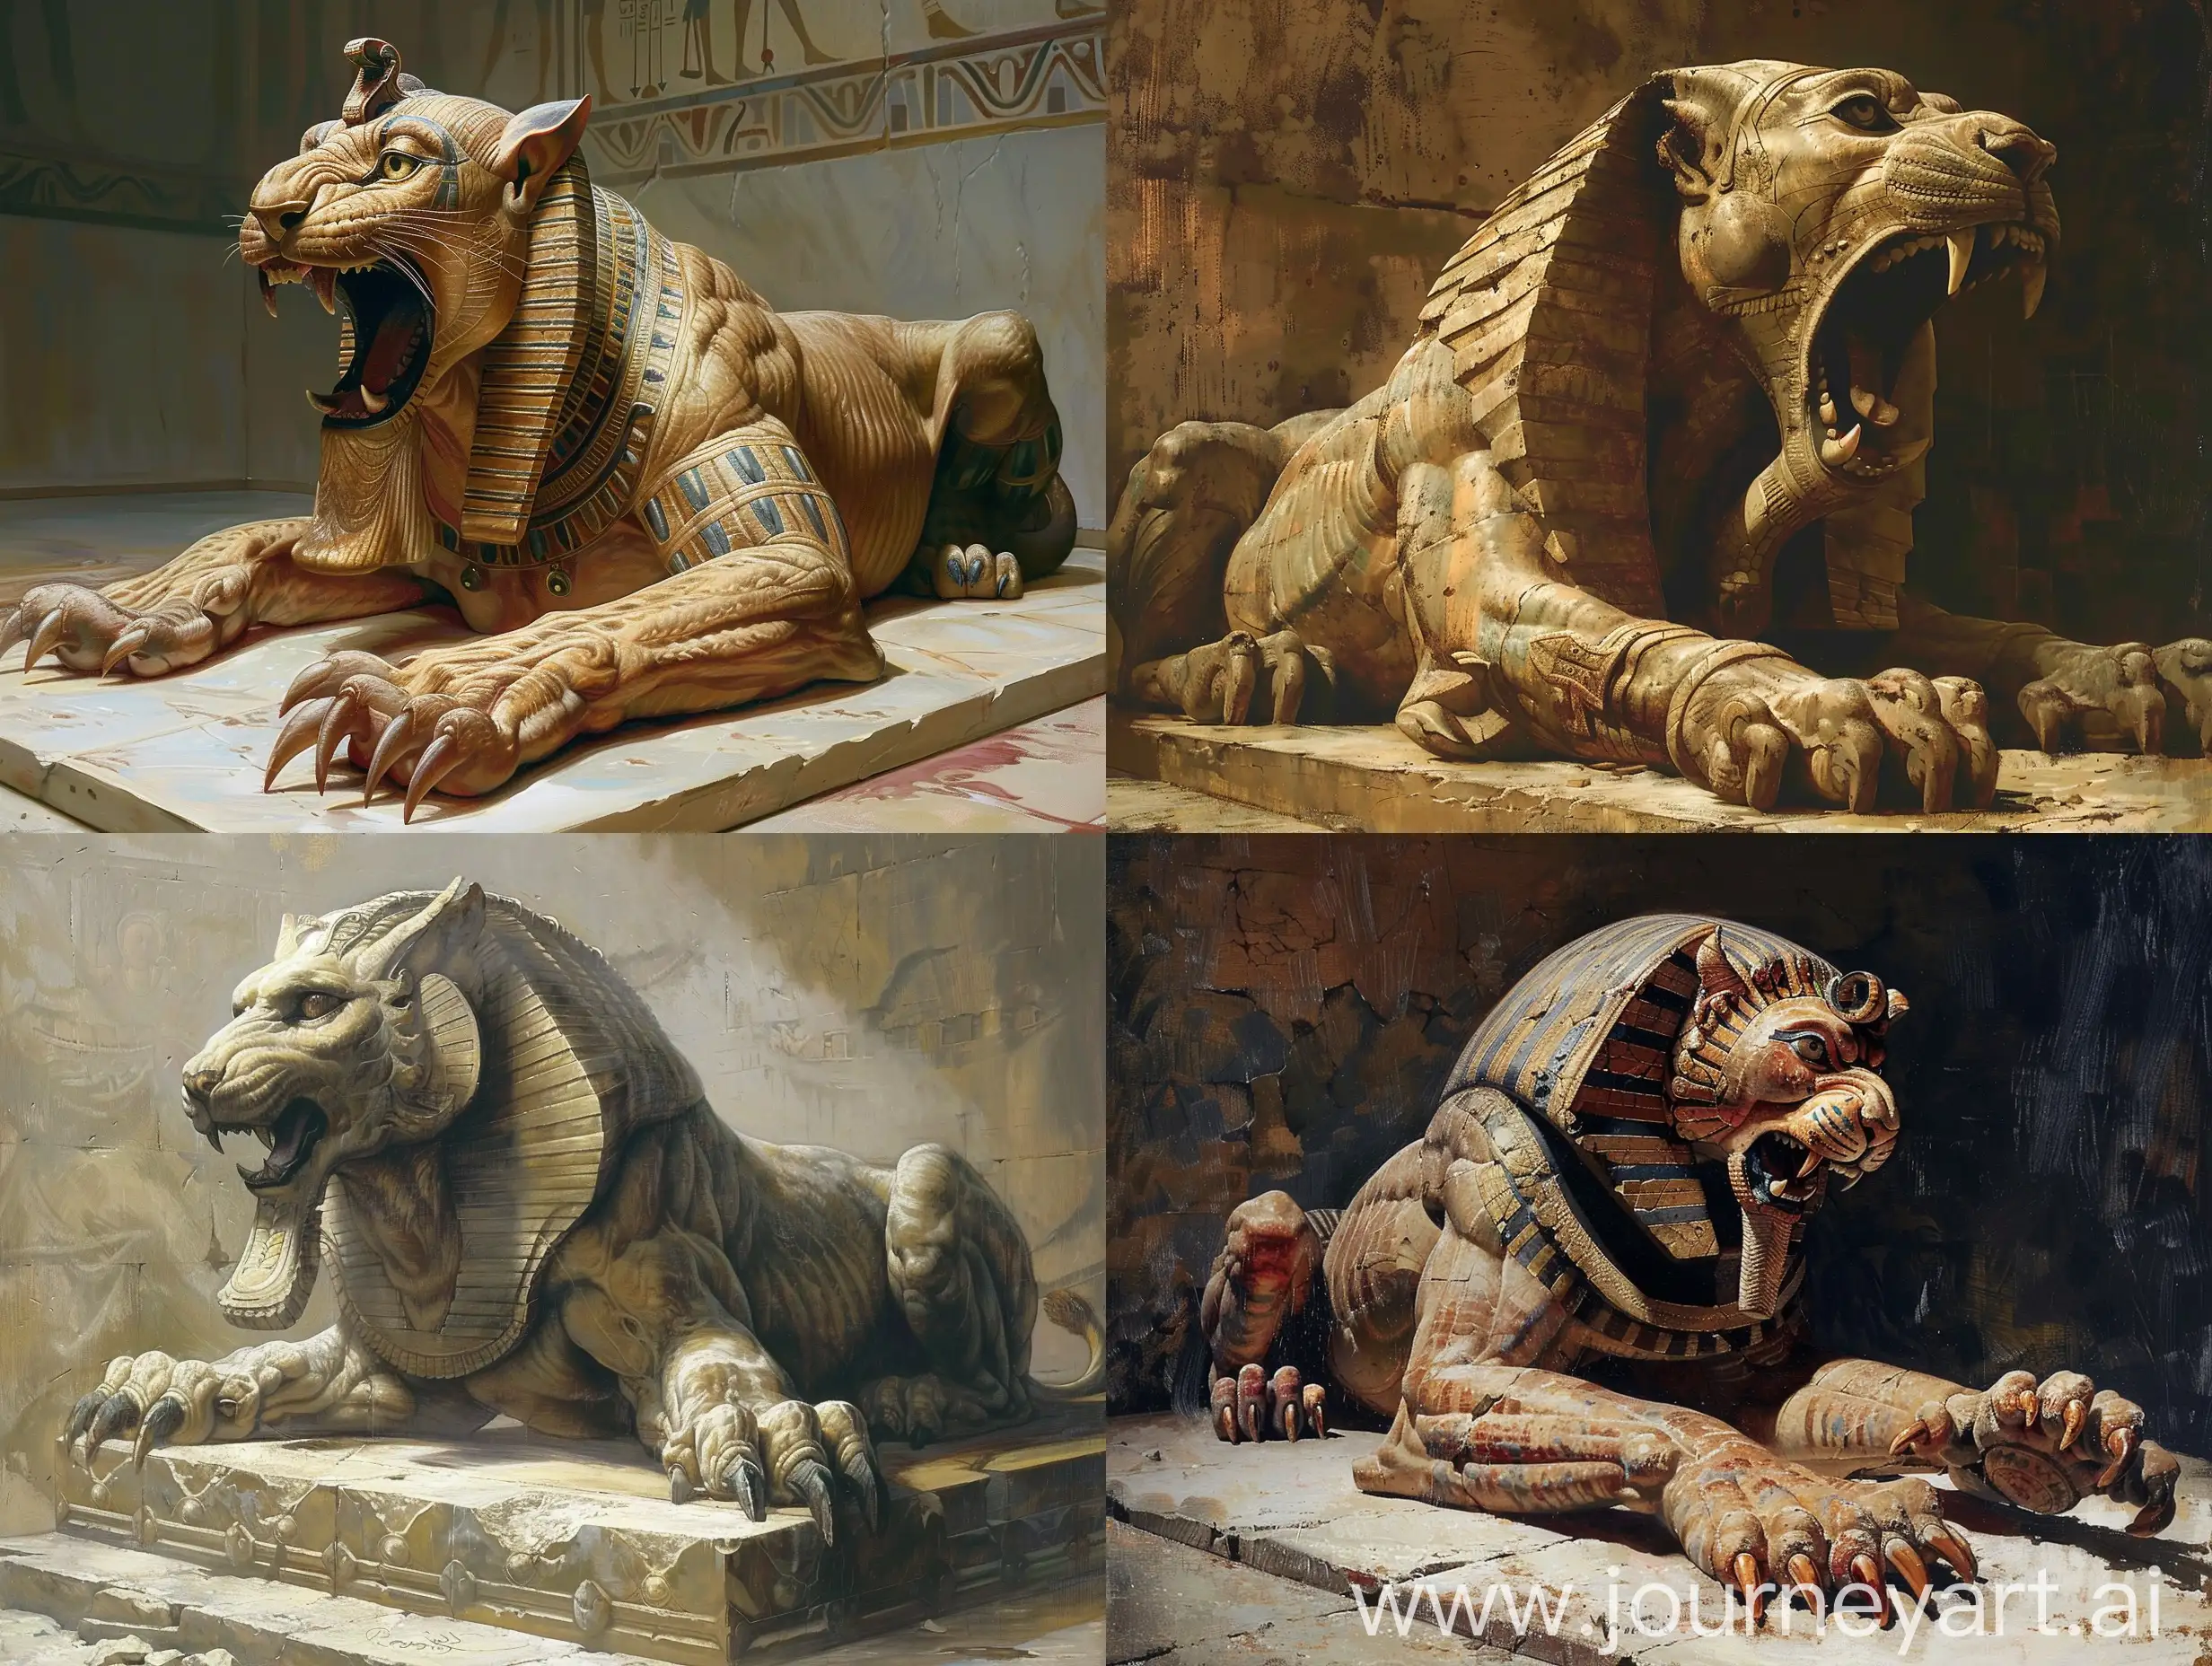 The Sphinx opened its mouth, extended its claws